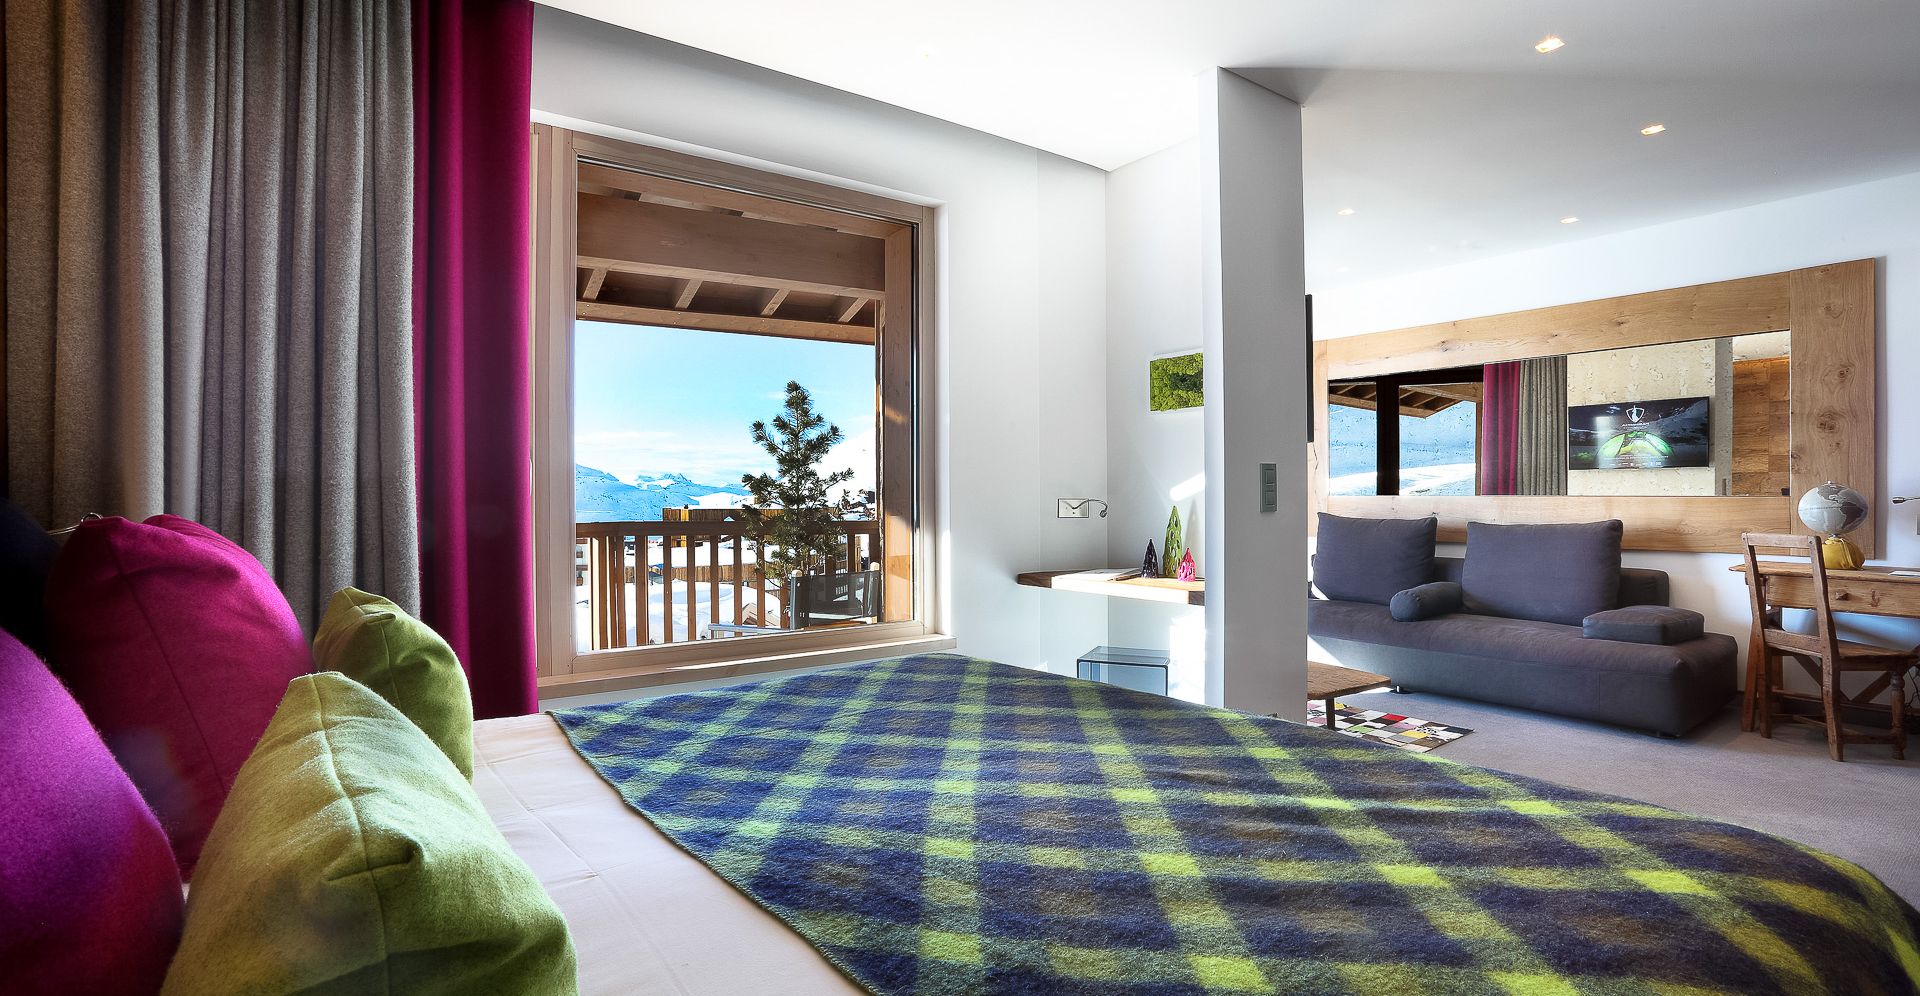 5 Star Hotel Val Thorens The Luxury Hotel Pashmina In Val